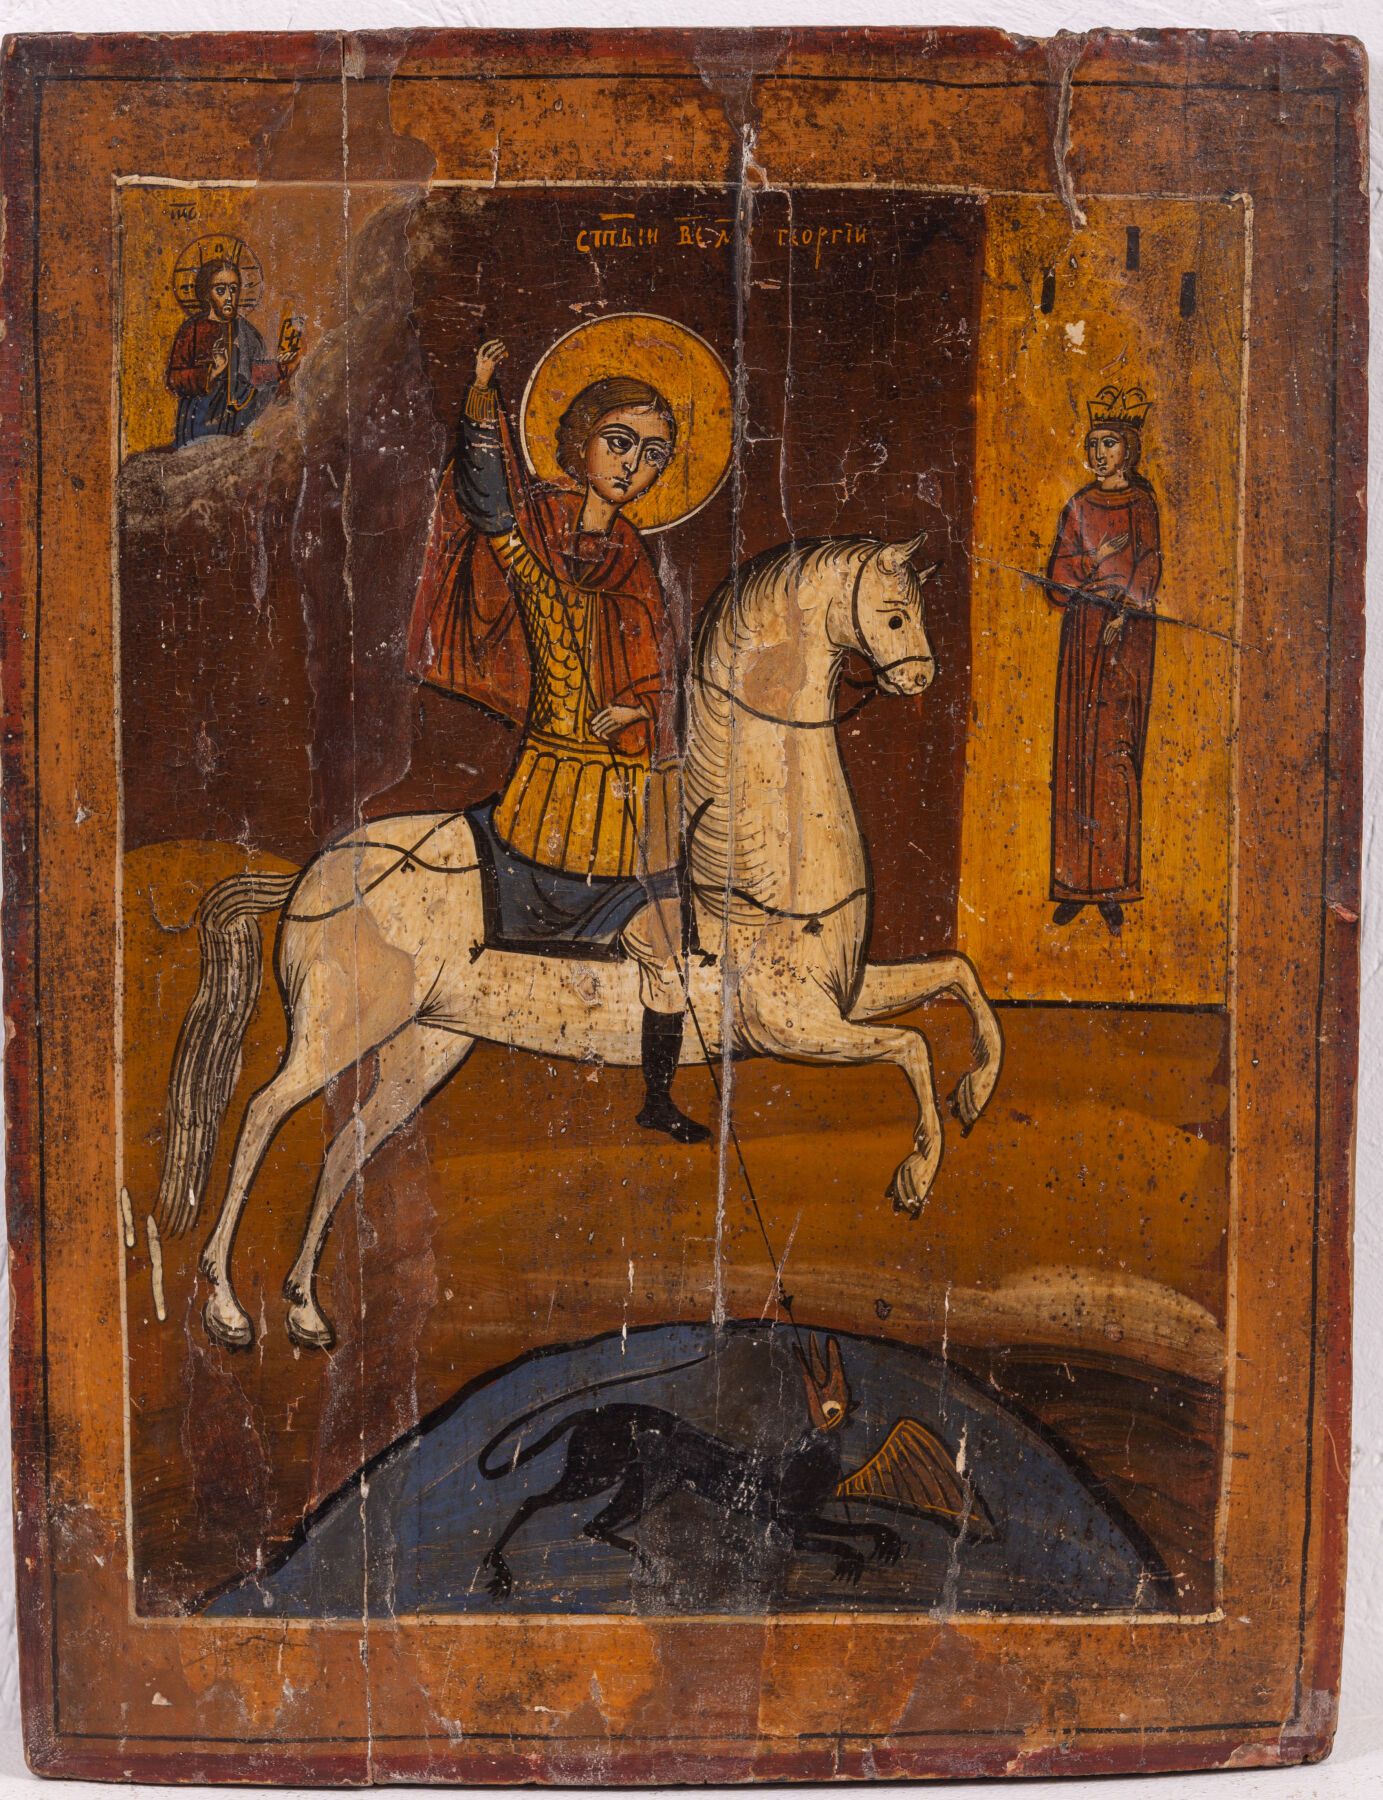 Null Saint George" icon
Russia, 18th century
Tempera on wood
H_40,5 x 31 cm, as &hellip;